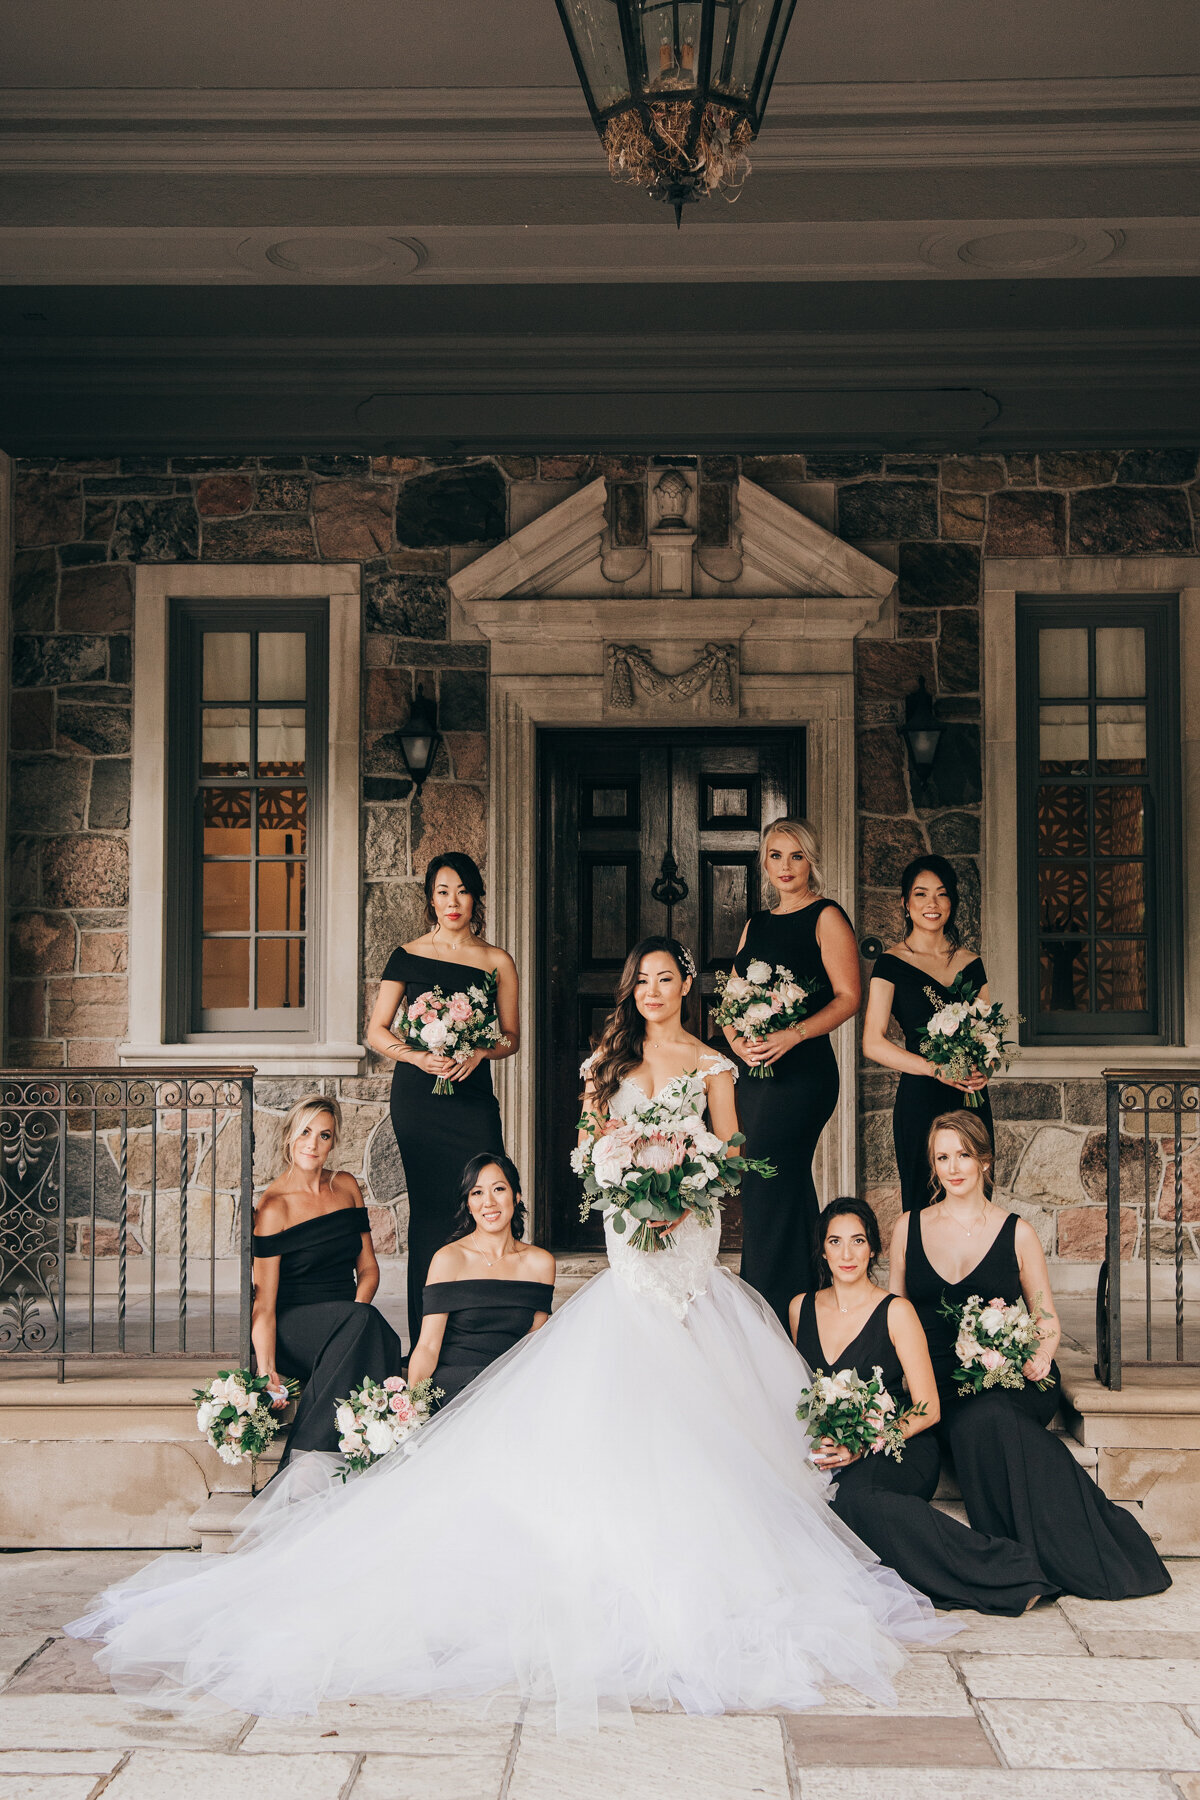 Luxurious bride and bridesmaids portraits holding white and pink florals